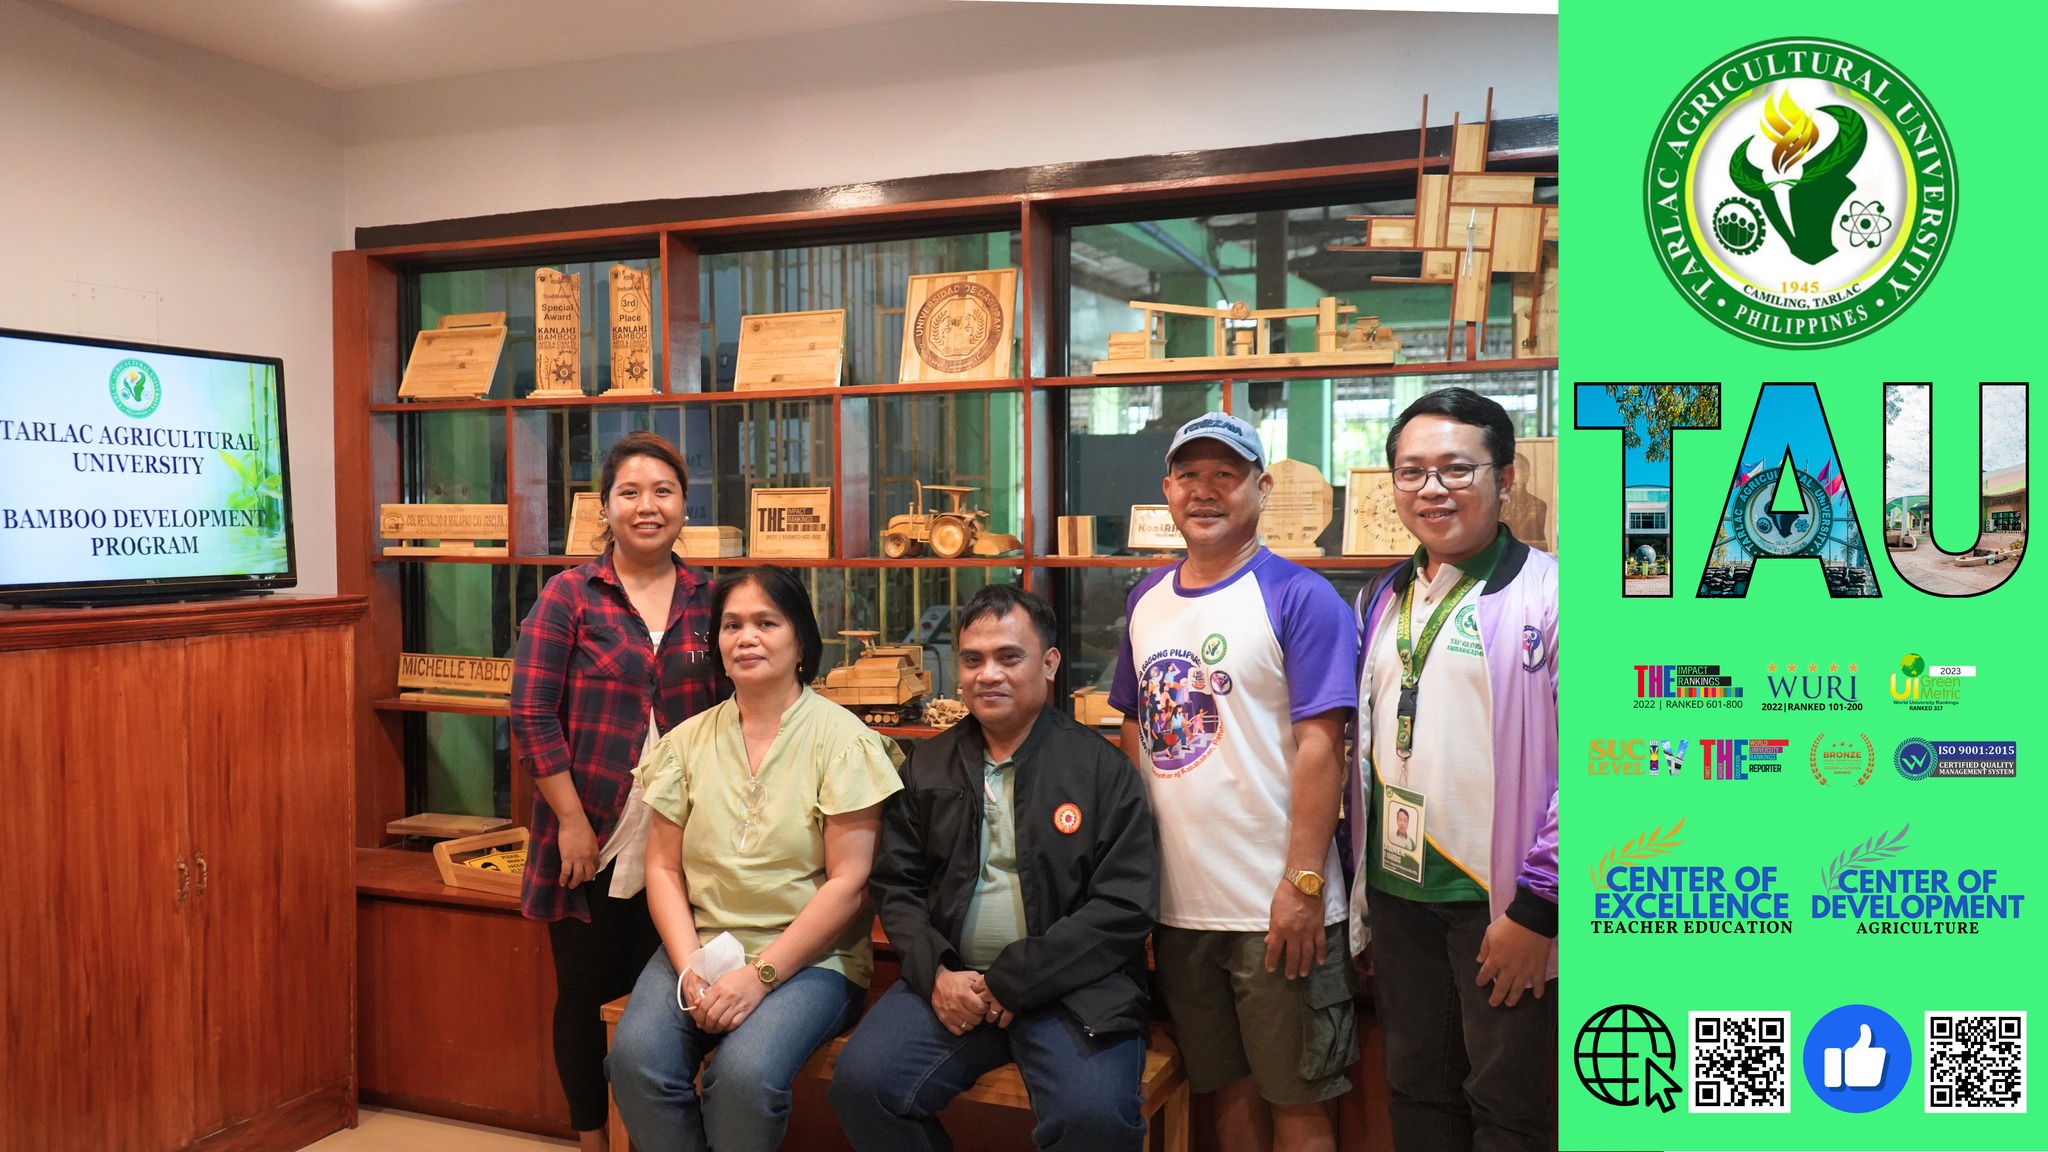 𝐂𝐀𝐏𝐓𝐔𝐑𝐄𝐃 𝐈𝐍 𝐋𝐄𝐍𝐒 | Representatives from Eulogio “AMANG” Rodriguez Institute of Science and Technology (EARIST) pay a visit to Tarlac Agricultural University (TAU)